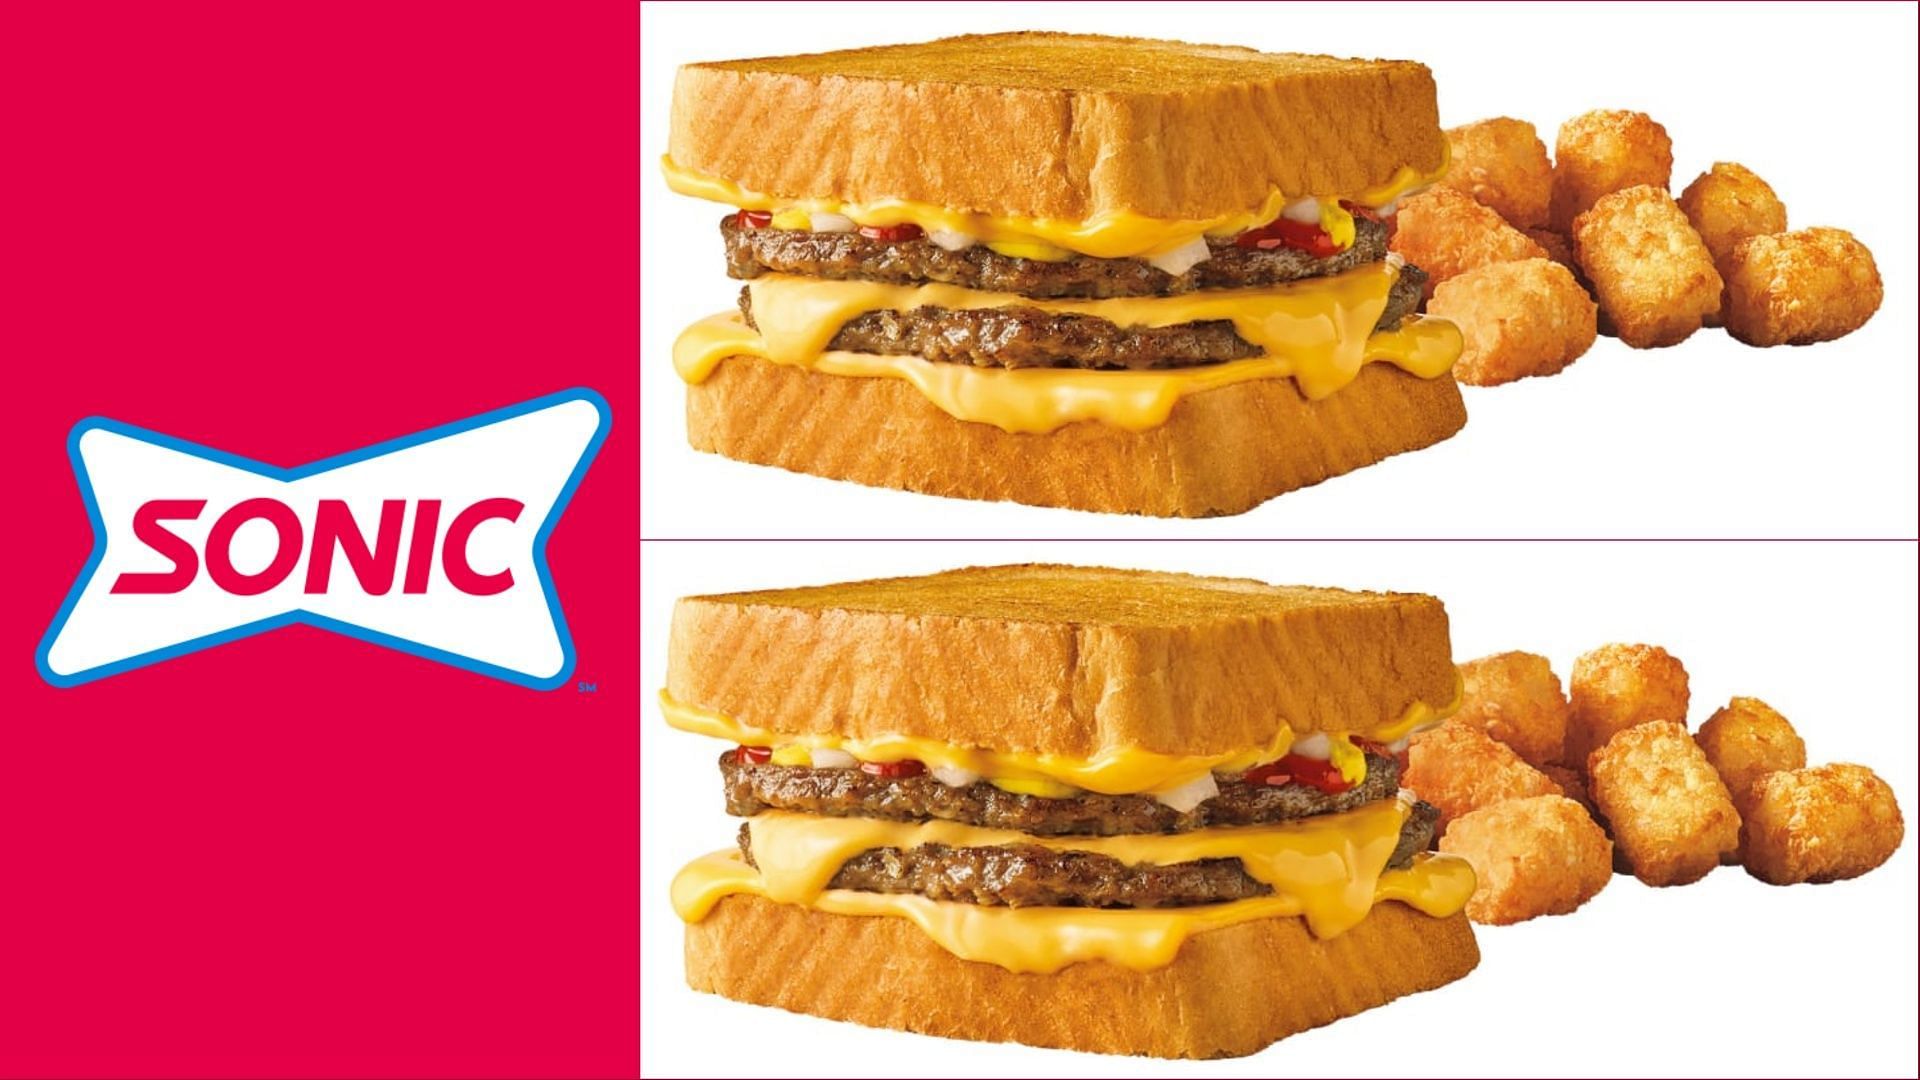 Sonic introduces a new 3.99 Grilled Cheese Double Burger and Tots deal